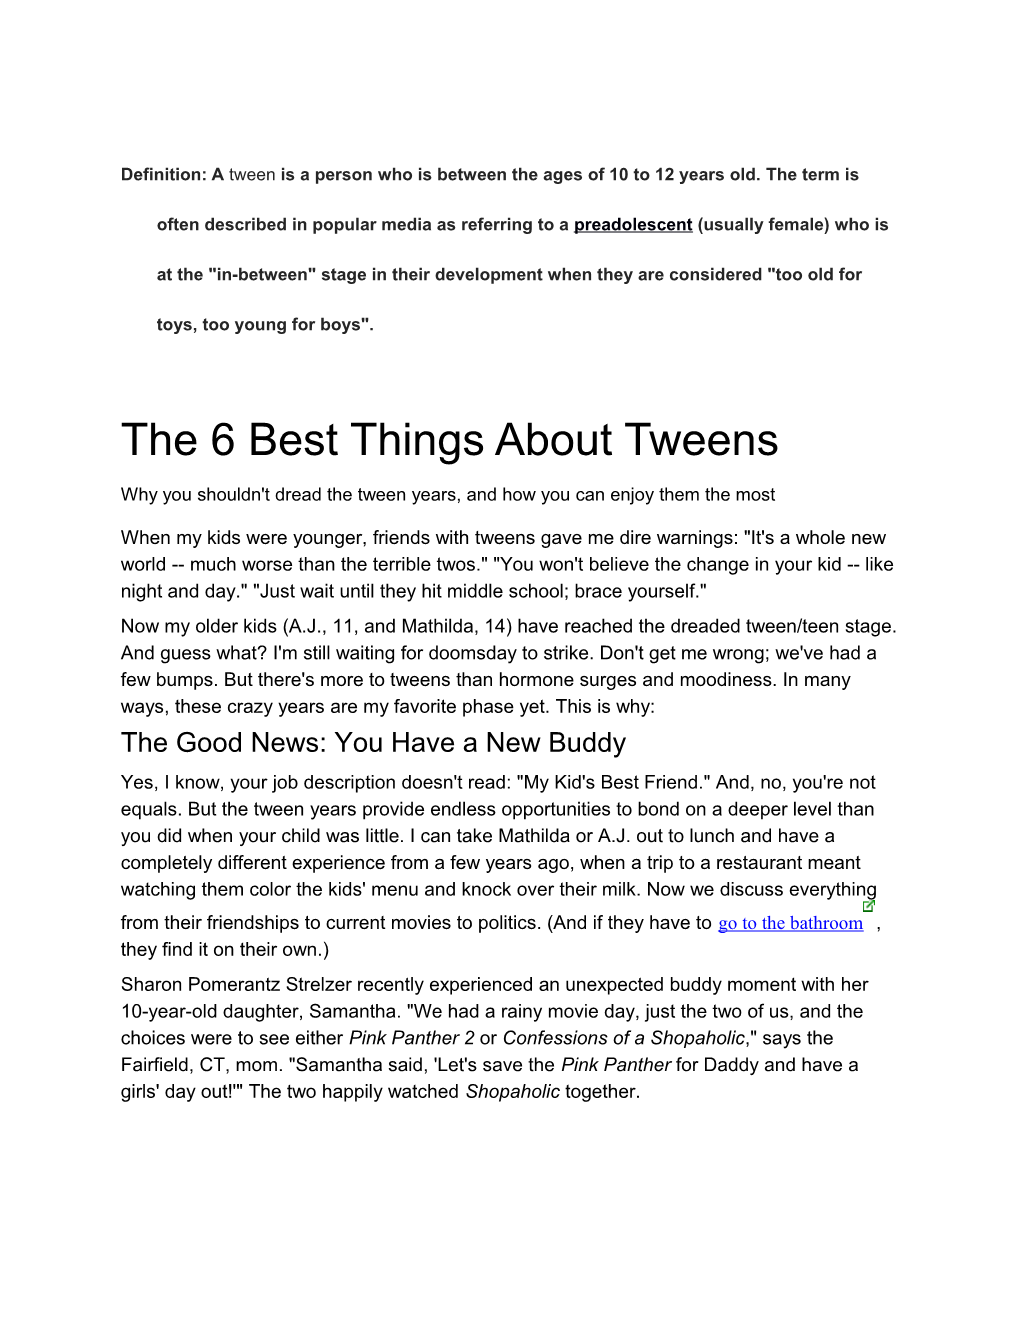 The 6 Best Things About Tweens